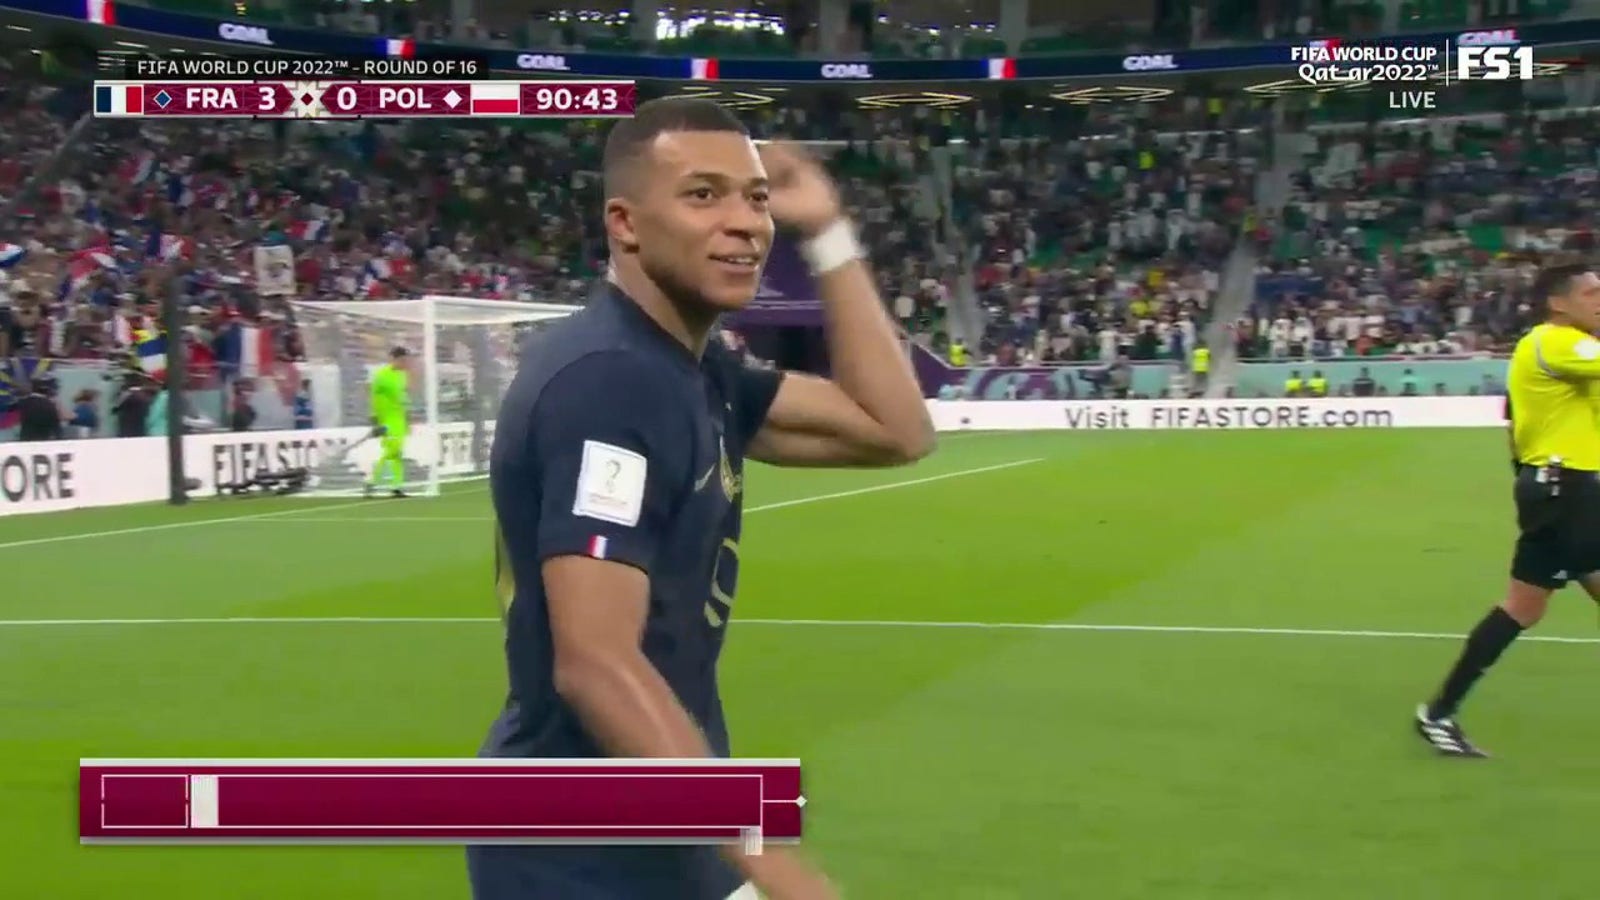 France's Kylian Mbappe scores against Poland in the 90' 